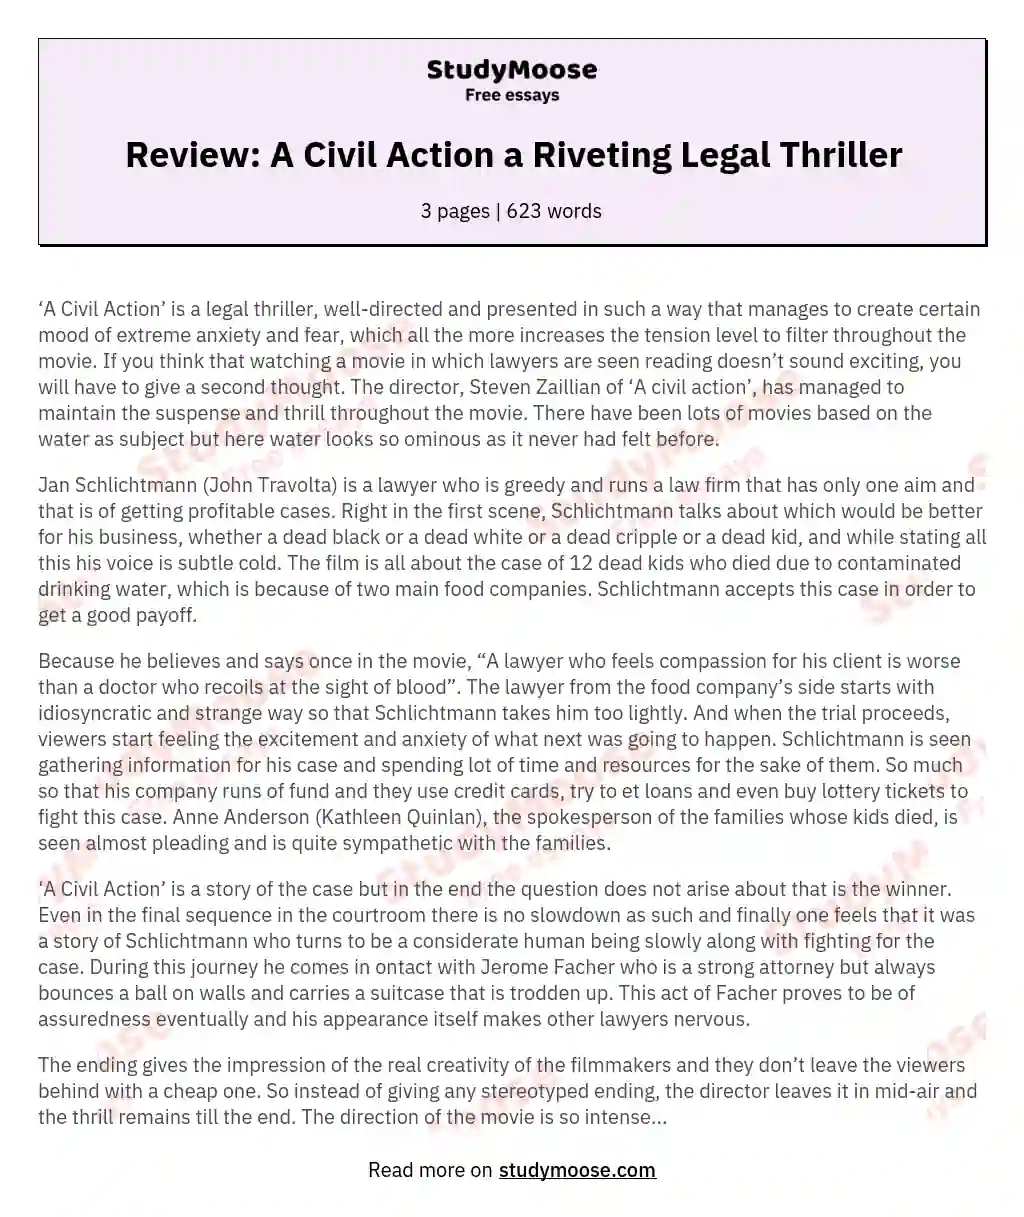 Review: A Civil Action a Riveting Legal Thriller essay